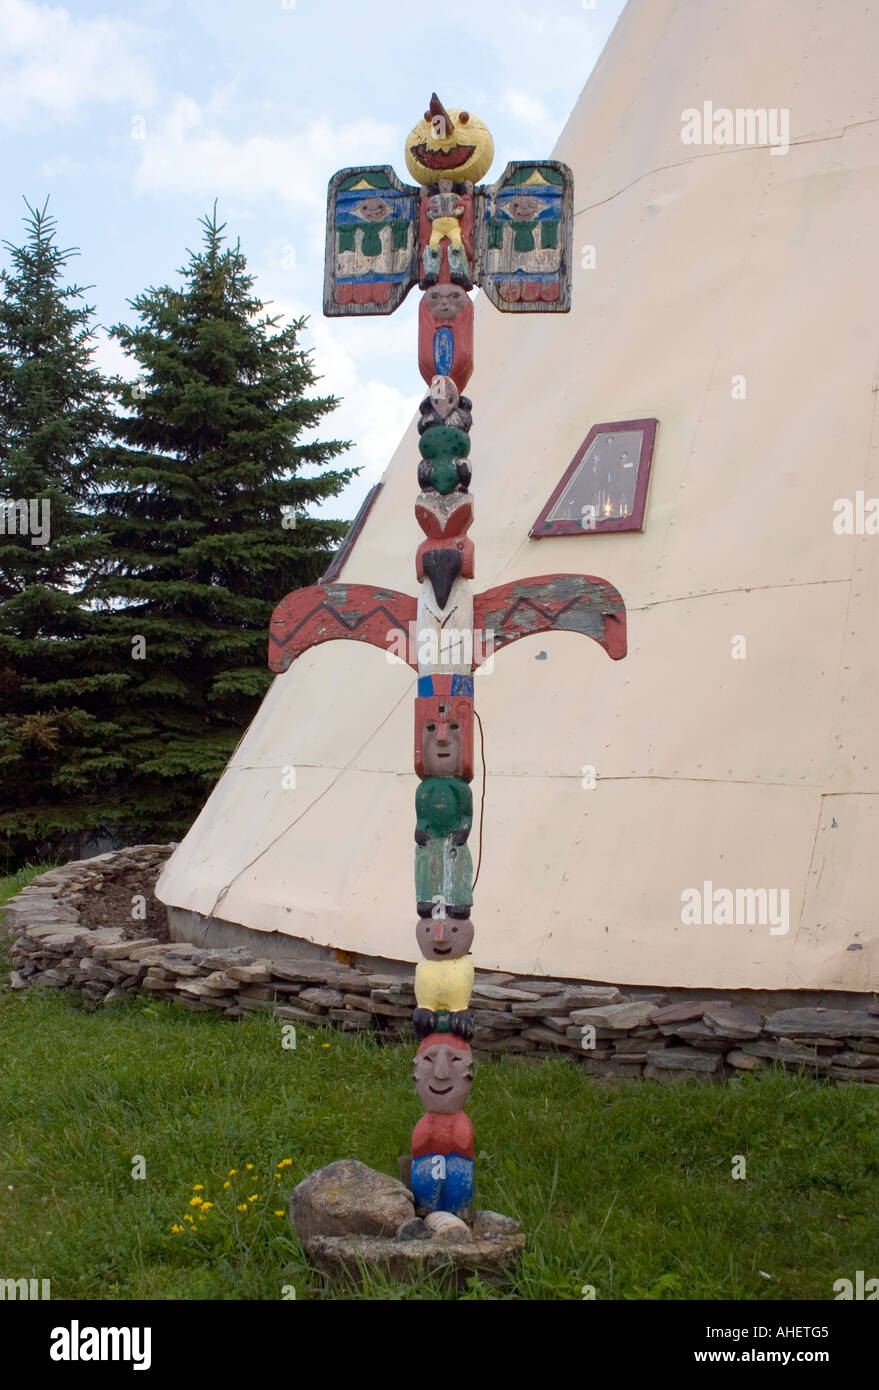 Totem au TePee dans Cherry Valley New York Banque D'Images